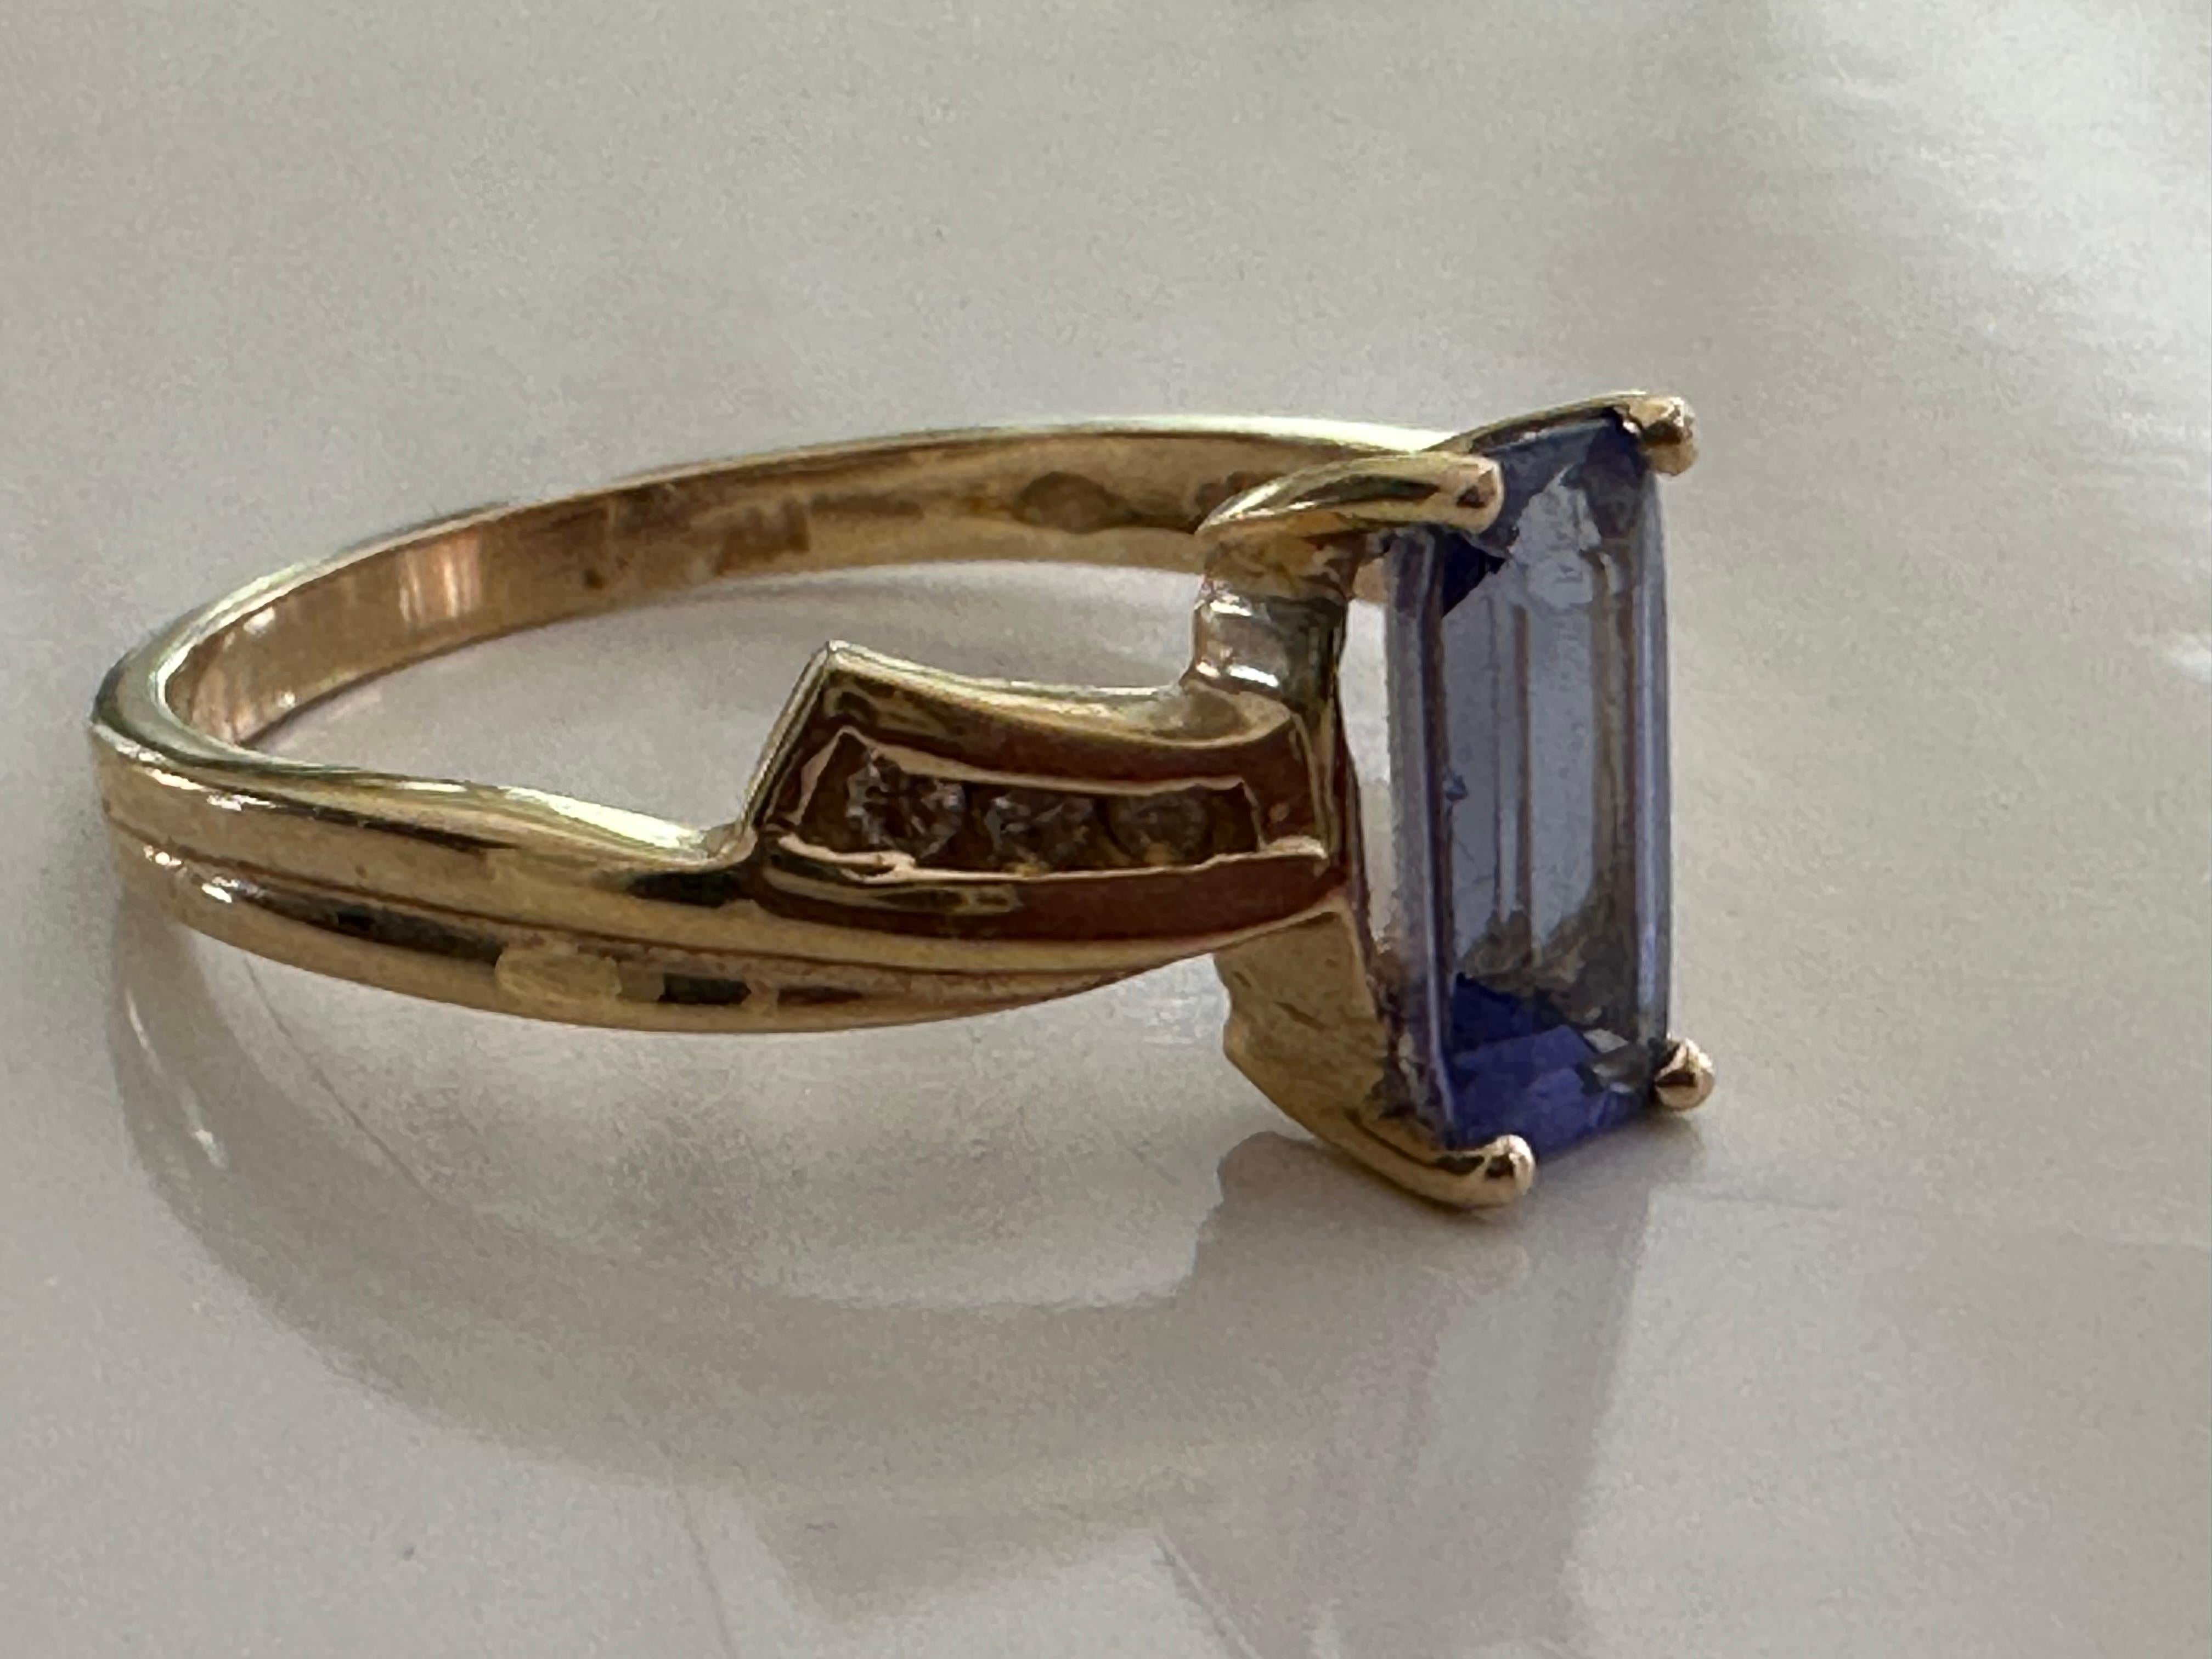 Crafted in the 1970s, this Retro-era ring is designed around a long cushion-cut natural blue tanzanite measuring approximately 1.28 carats flanked by six round diamonds, three on each side, measuring approximately 0.07 carats and fashioned in a 14kt